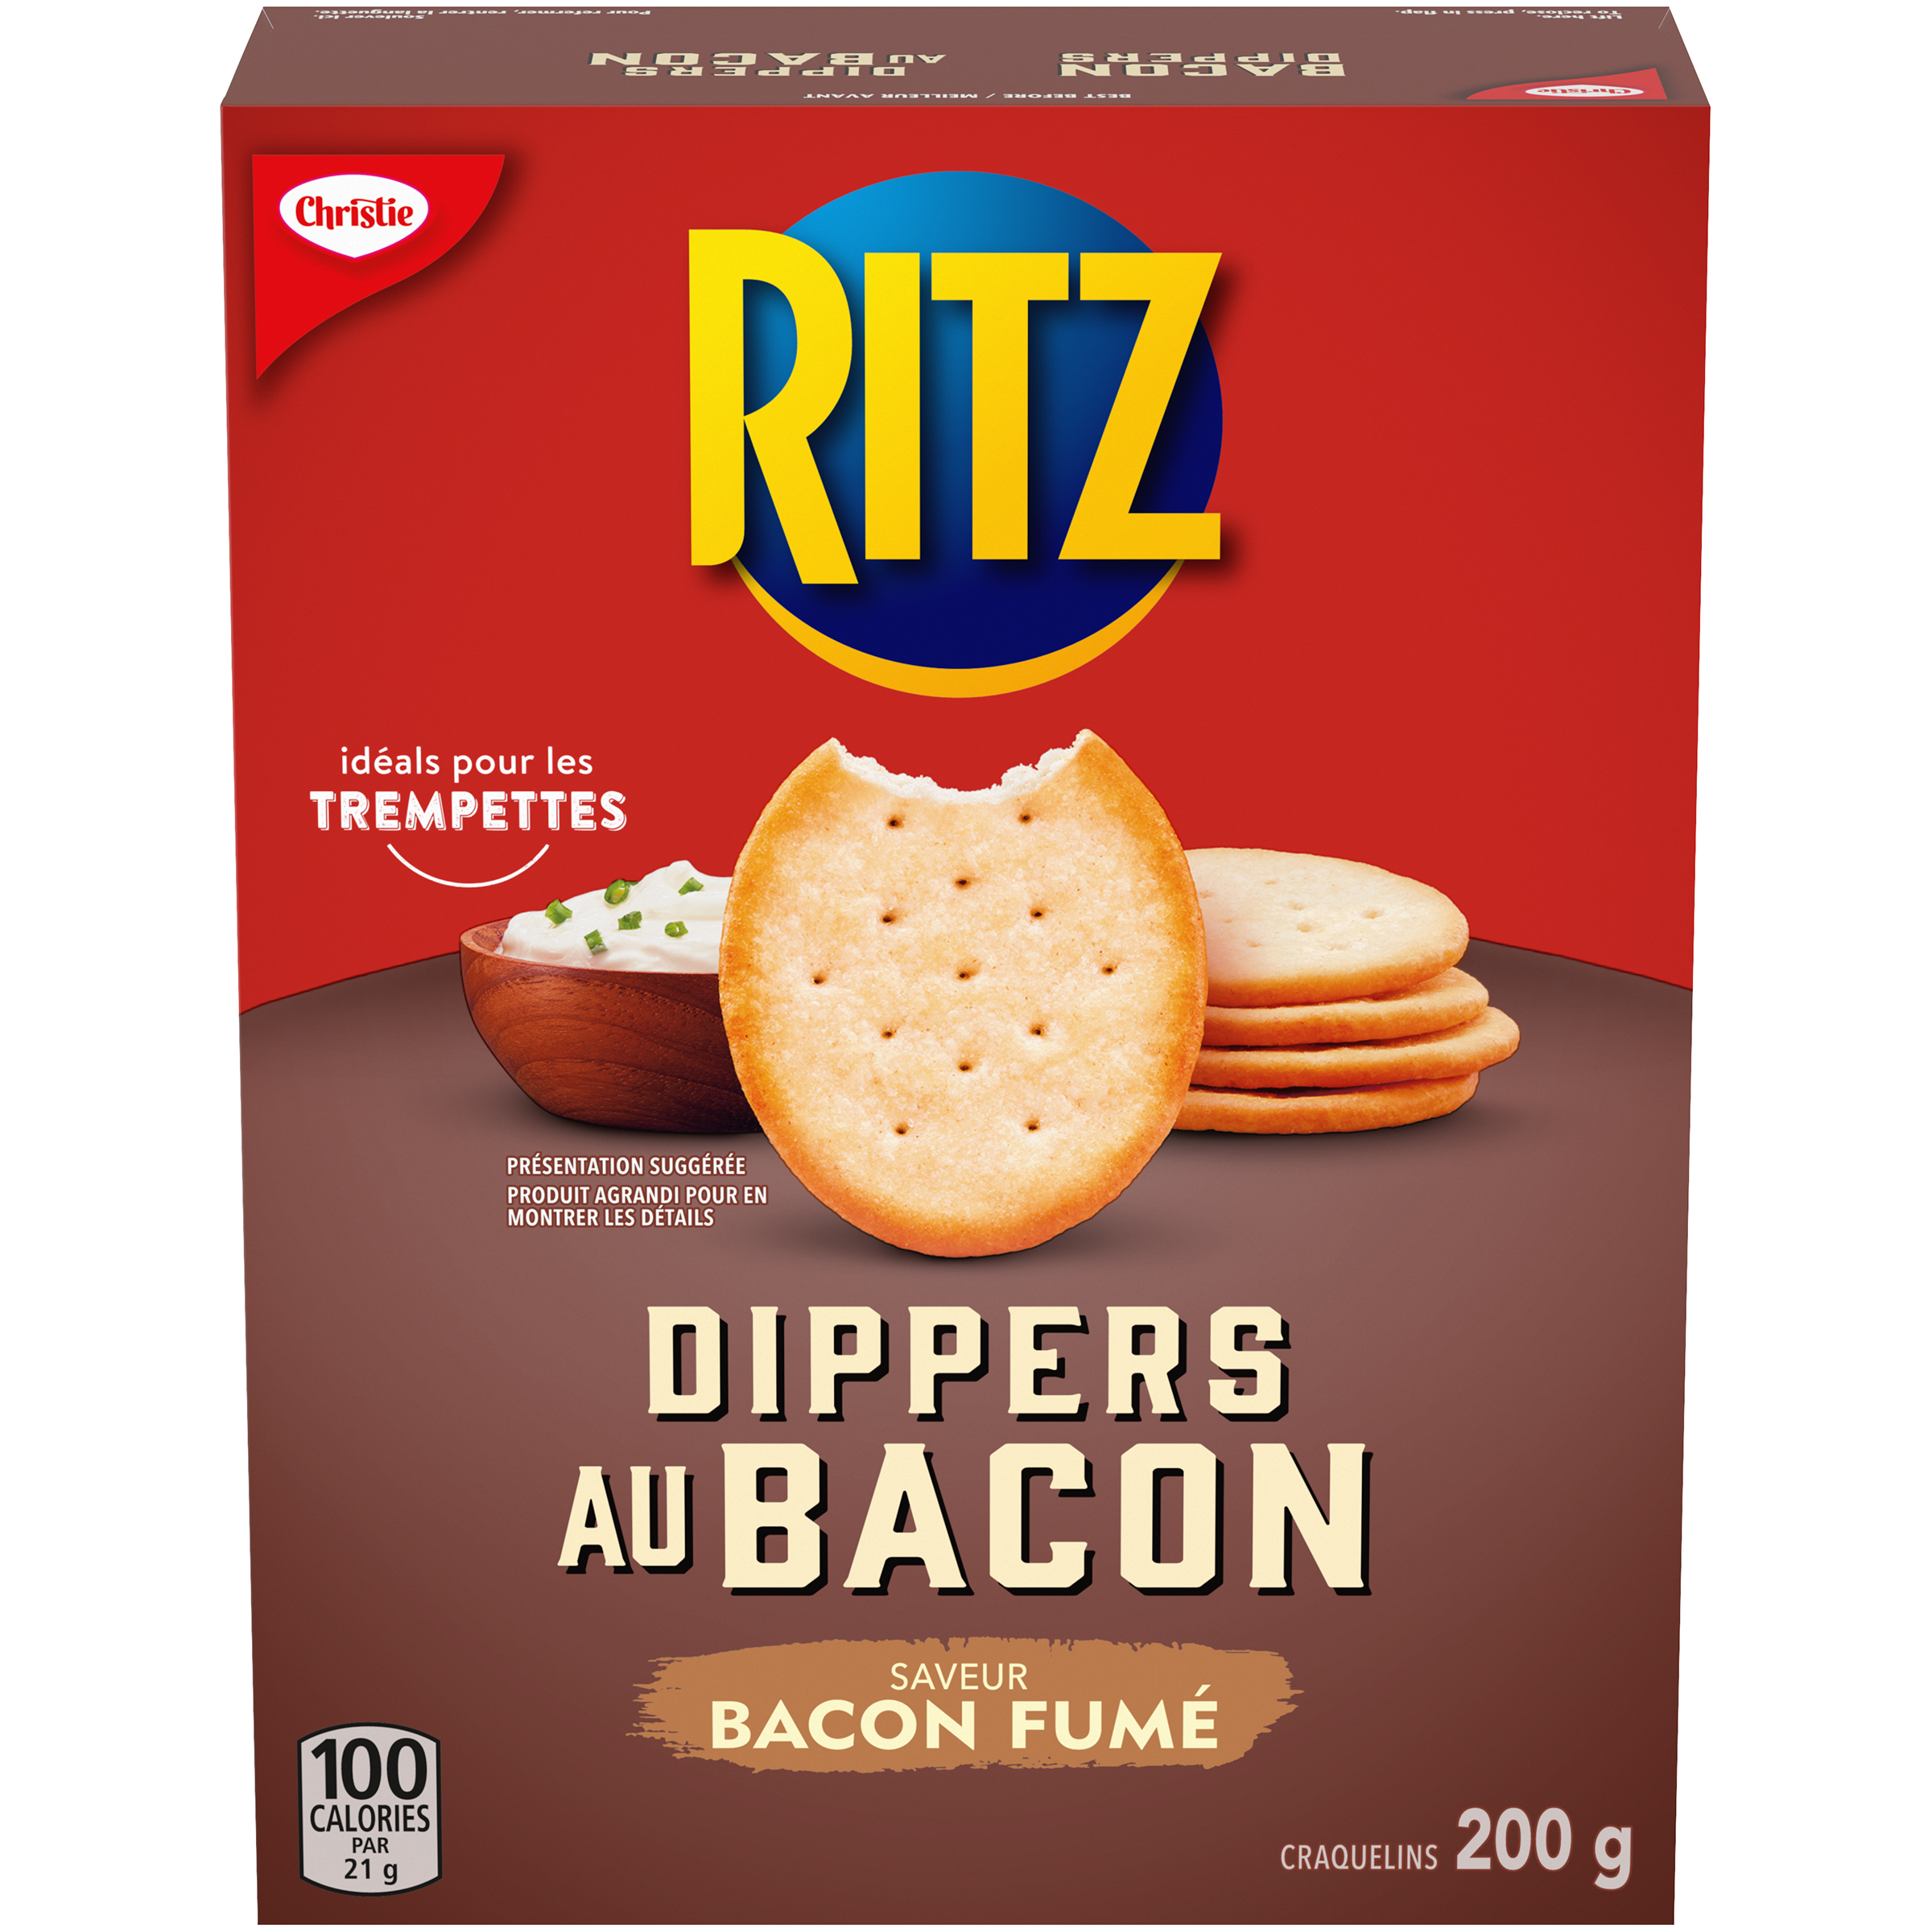 RITZ DIPPERS AU BACON 200G